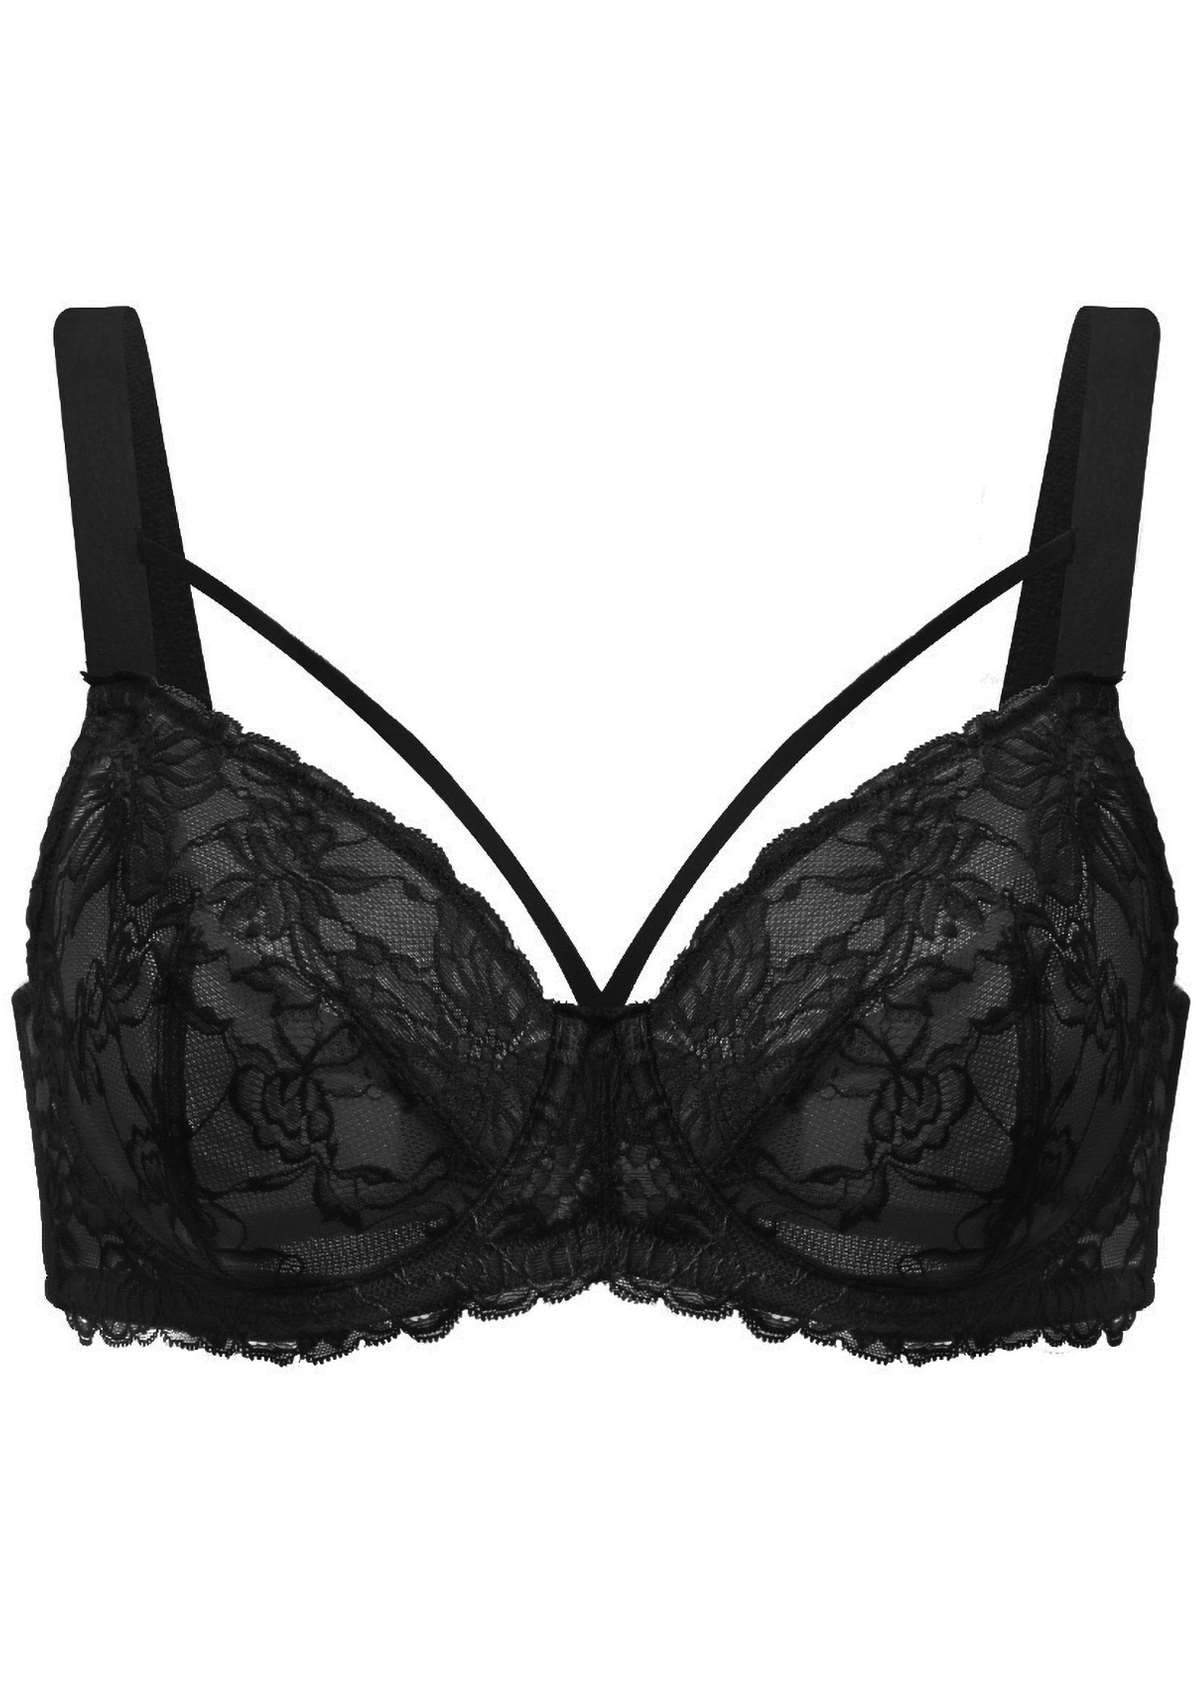 HSIA Pretty In Petals Bra - Plus Size Lingerie For Comfrot And Support - Black / 42 / C